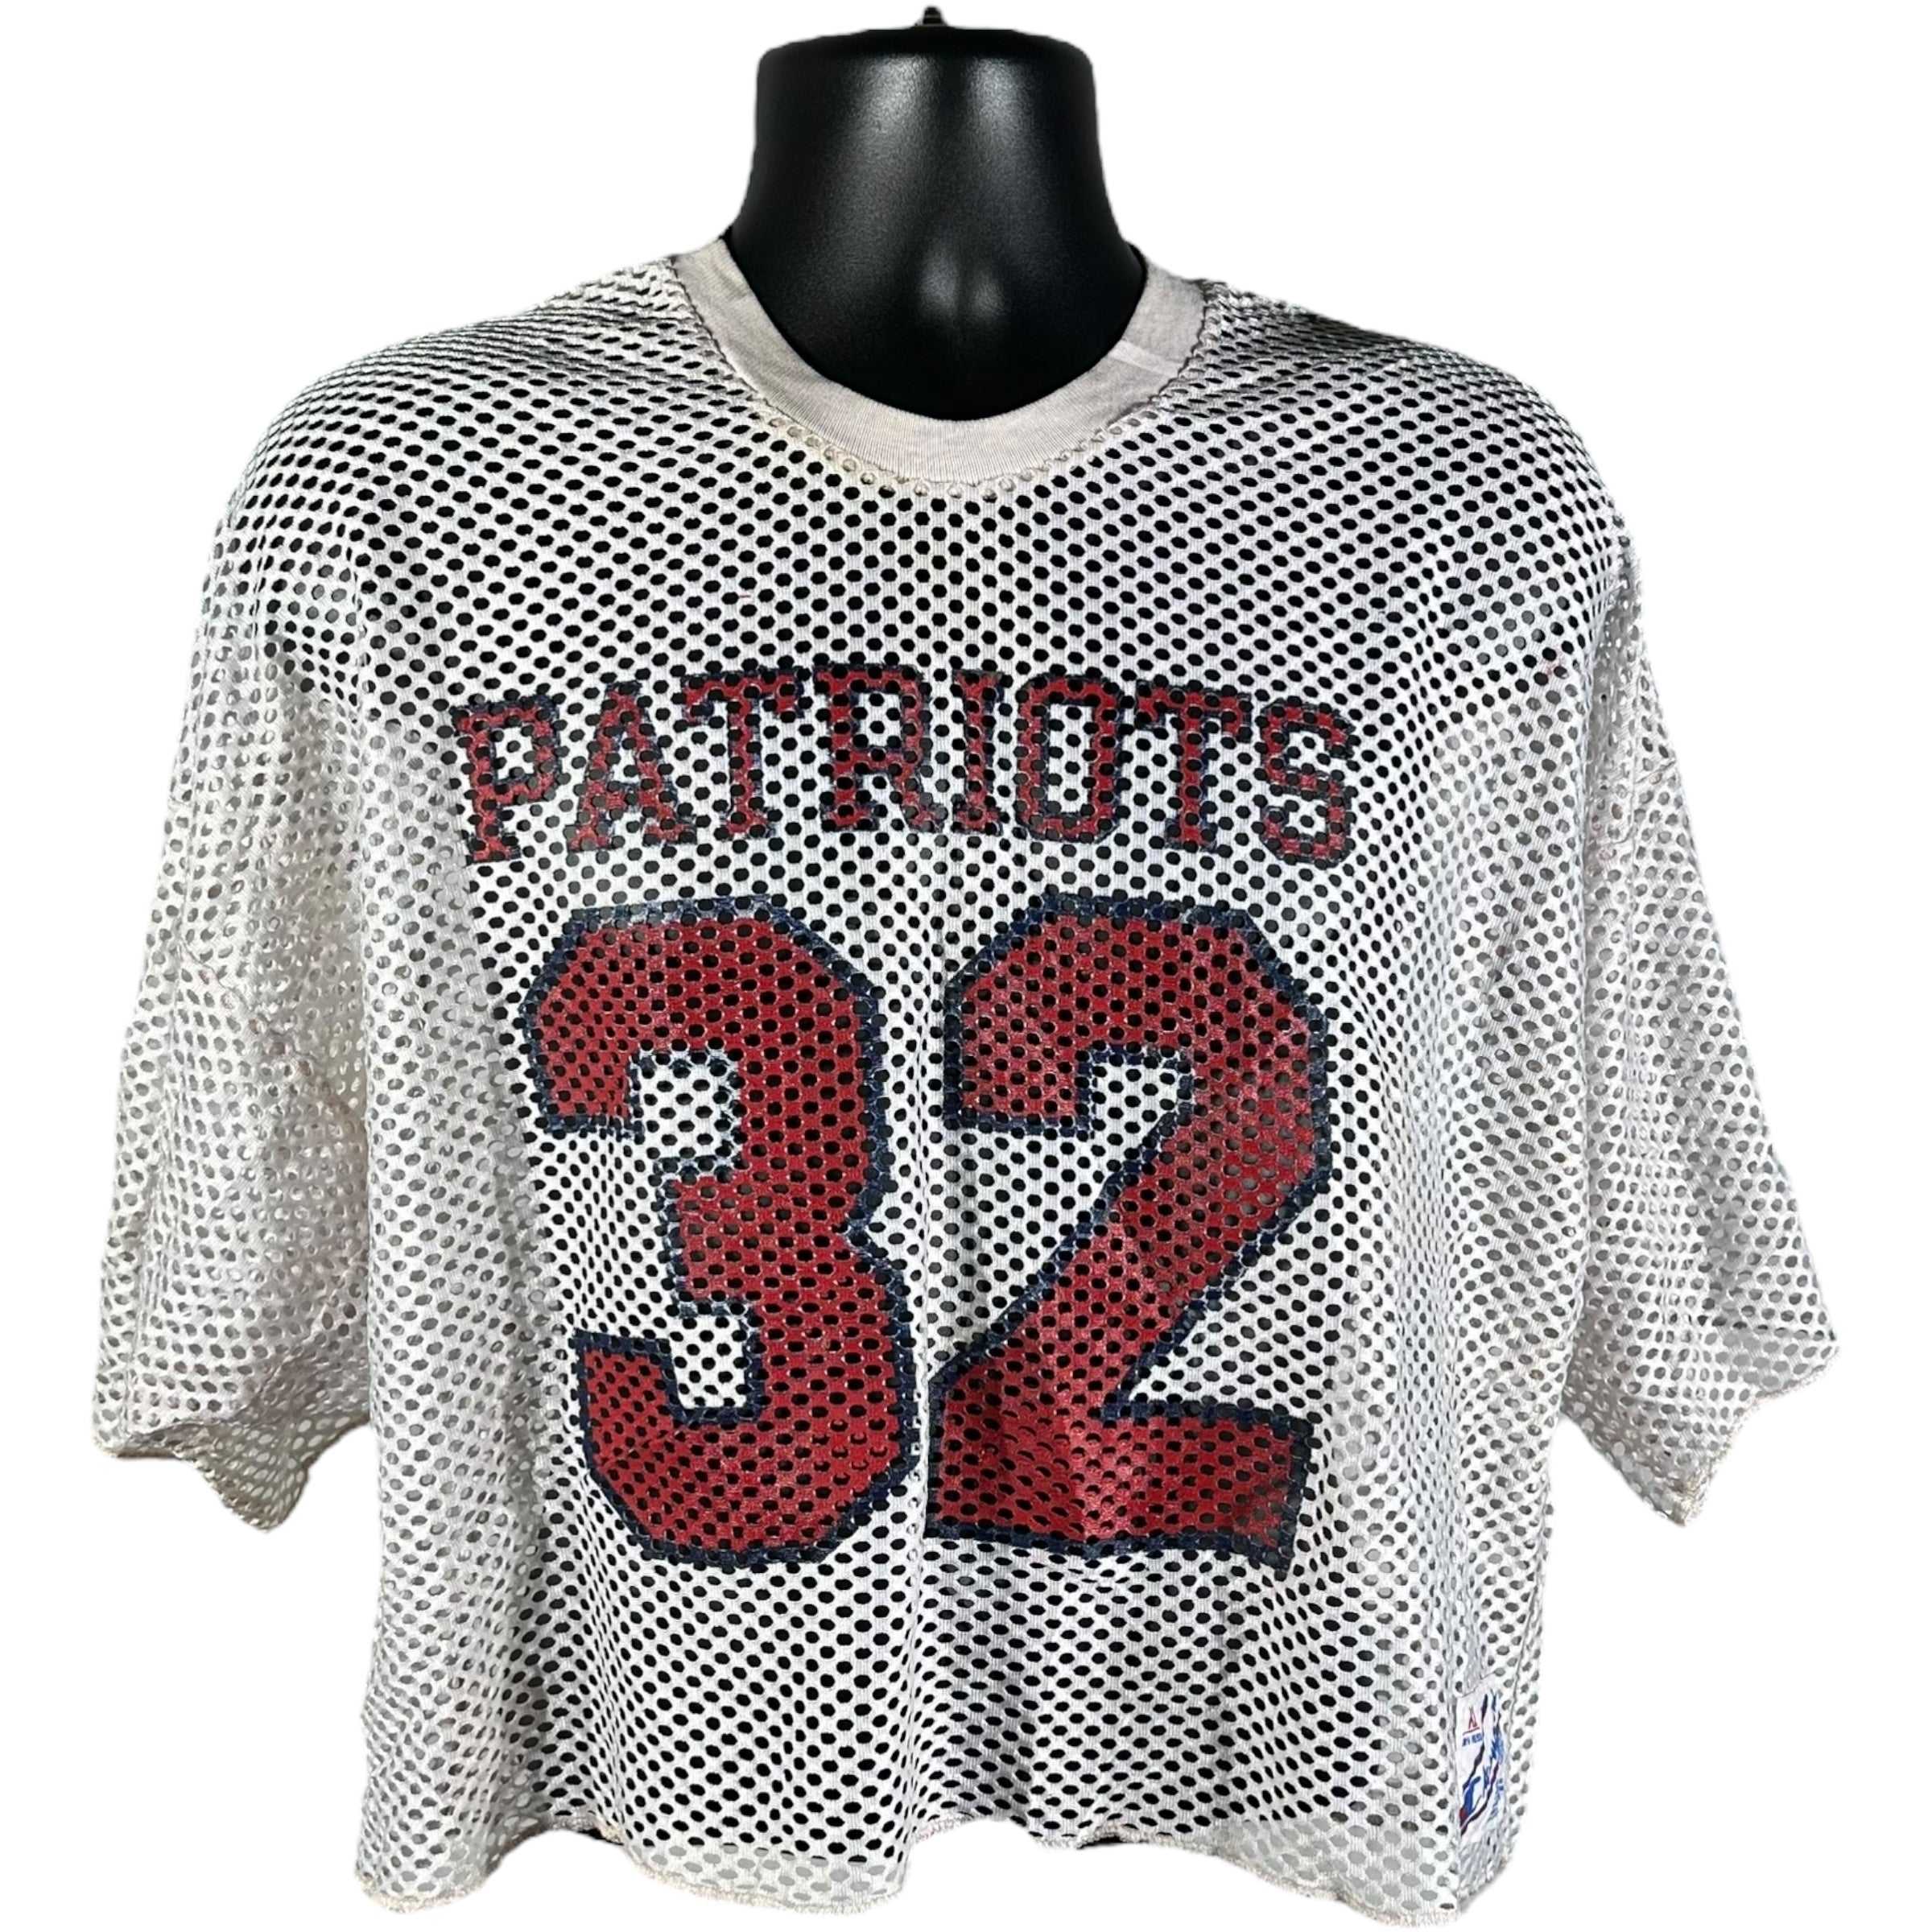 Vintage Champion Patriots #32 Cropped Football Jersey